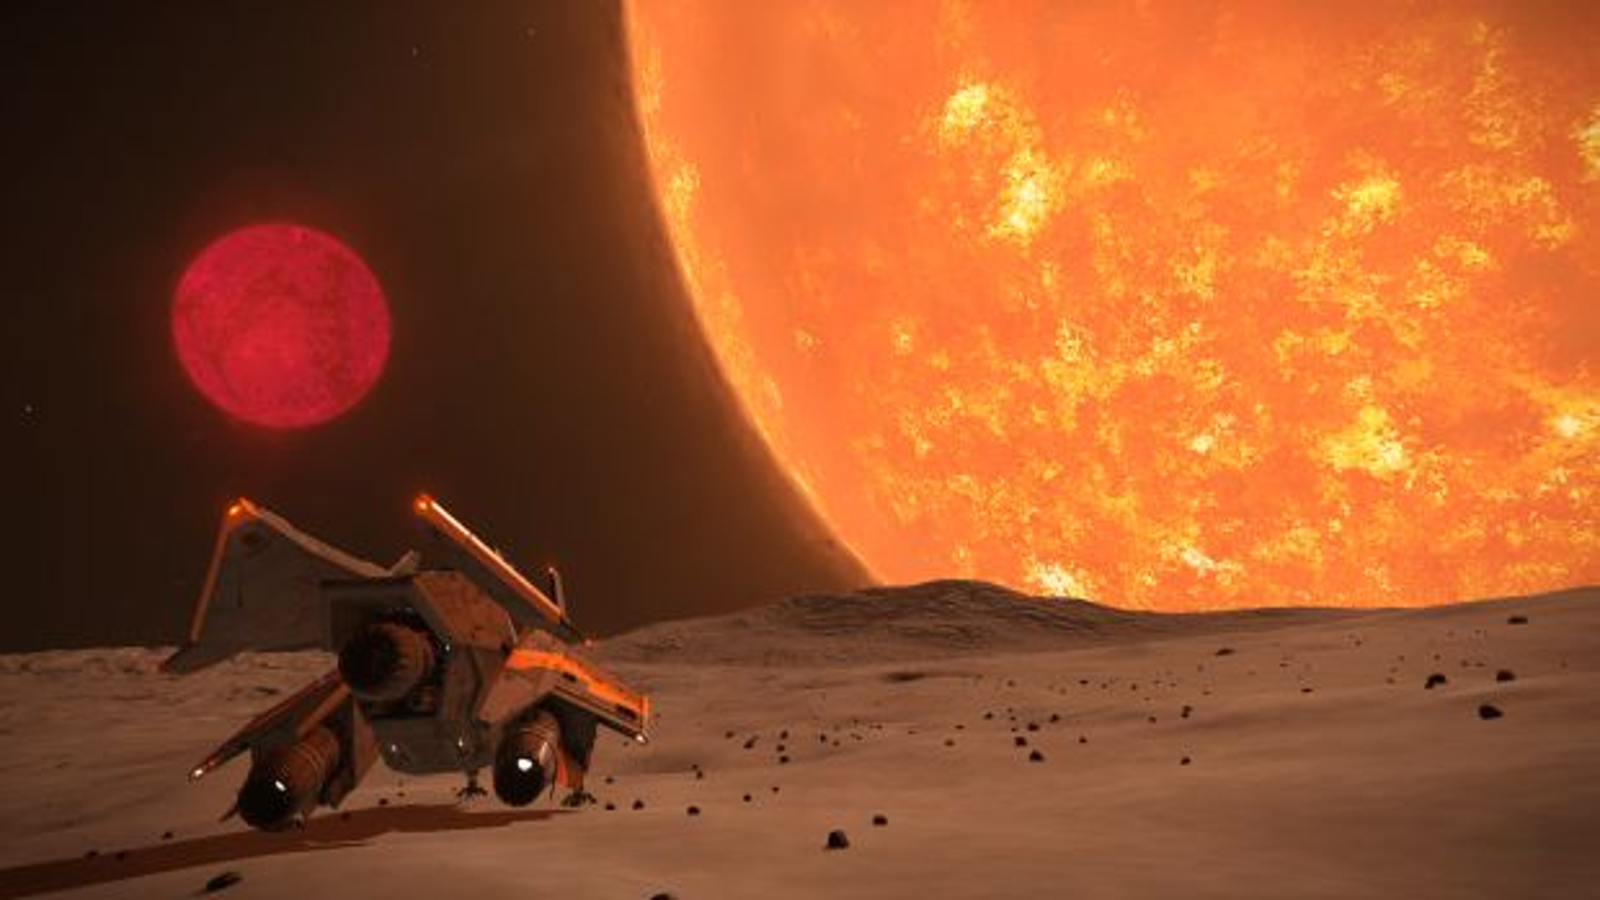 Elite Dangerous: Odyssey, which lets you leave your ship and walk on  planets, now has a release date